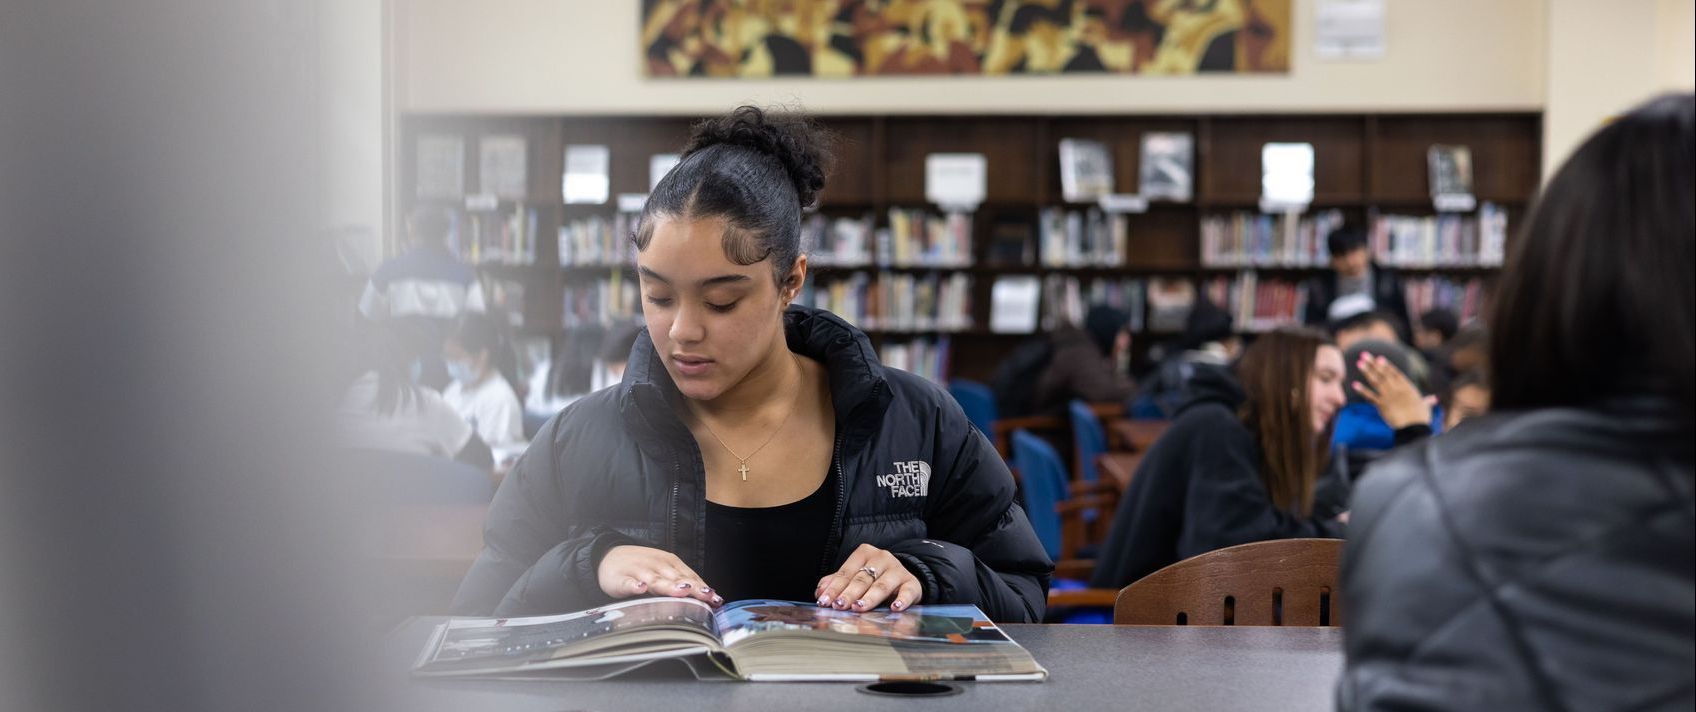 Student leafing through pages of a book in the Seward Park Campus Library